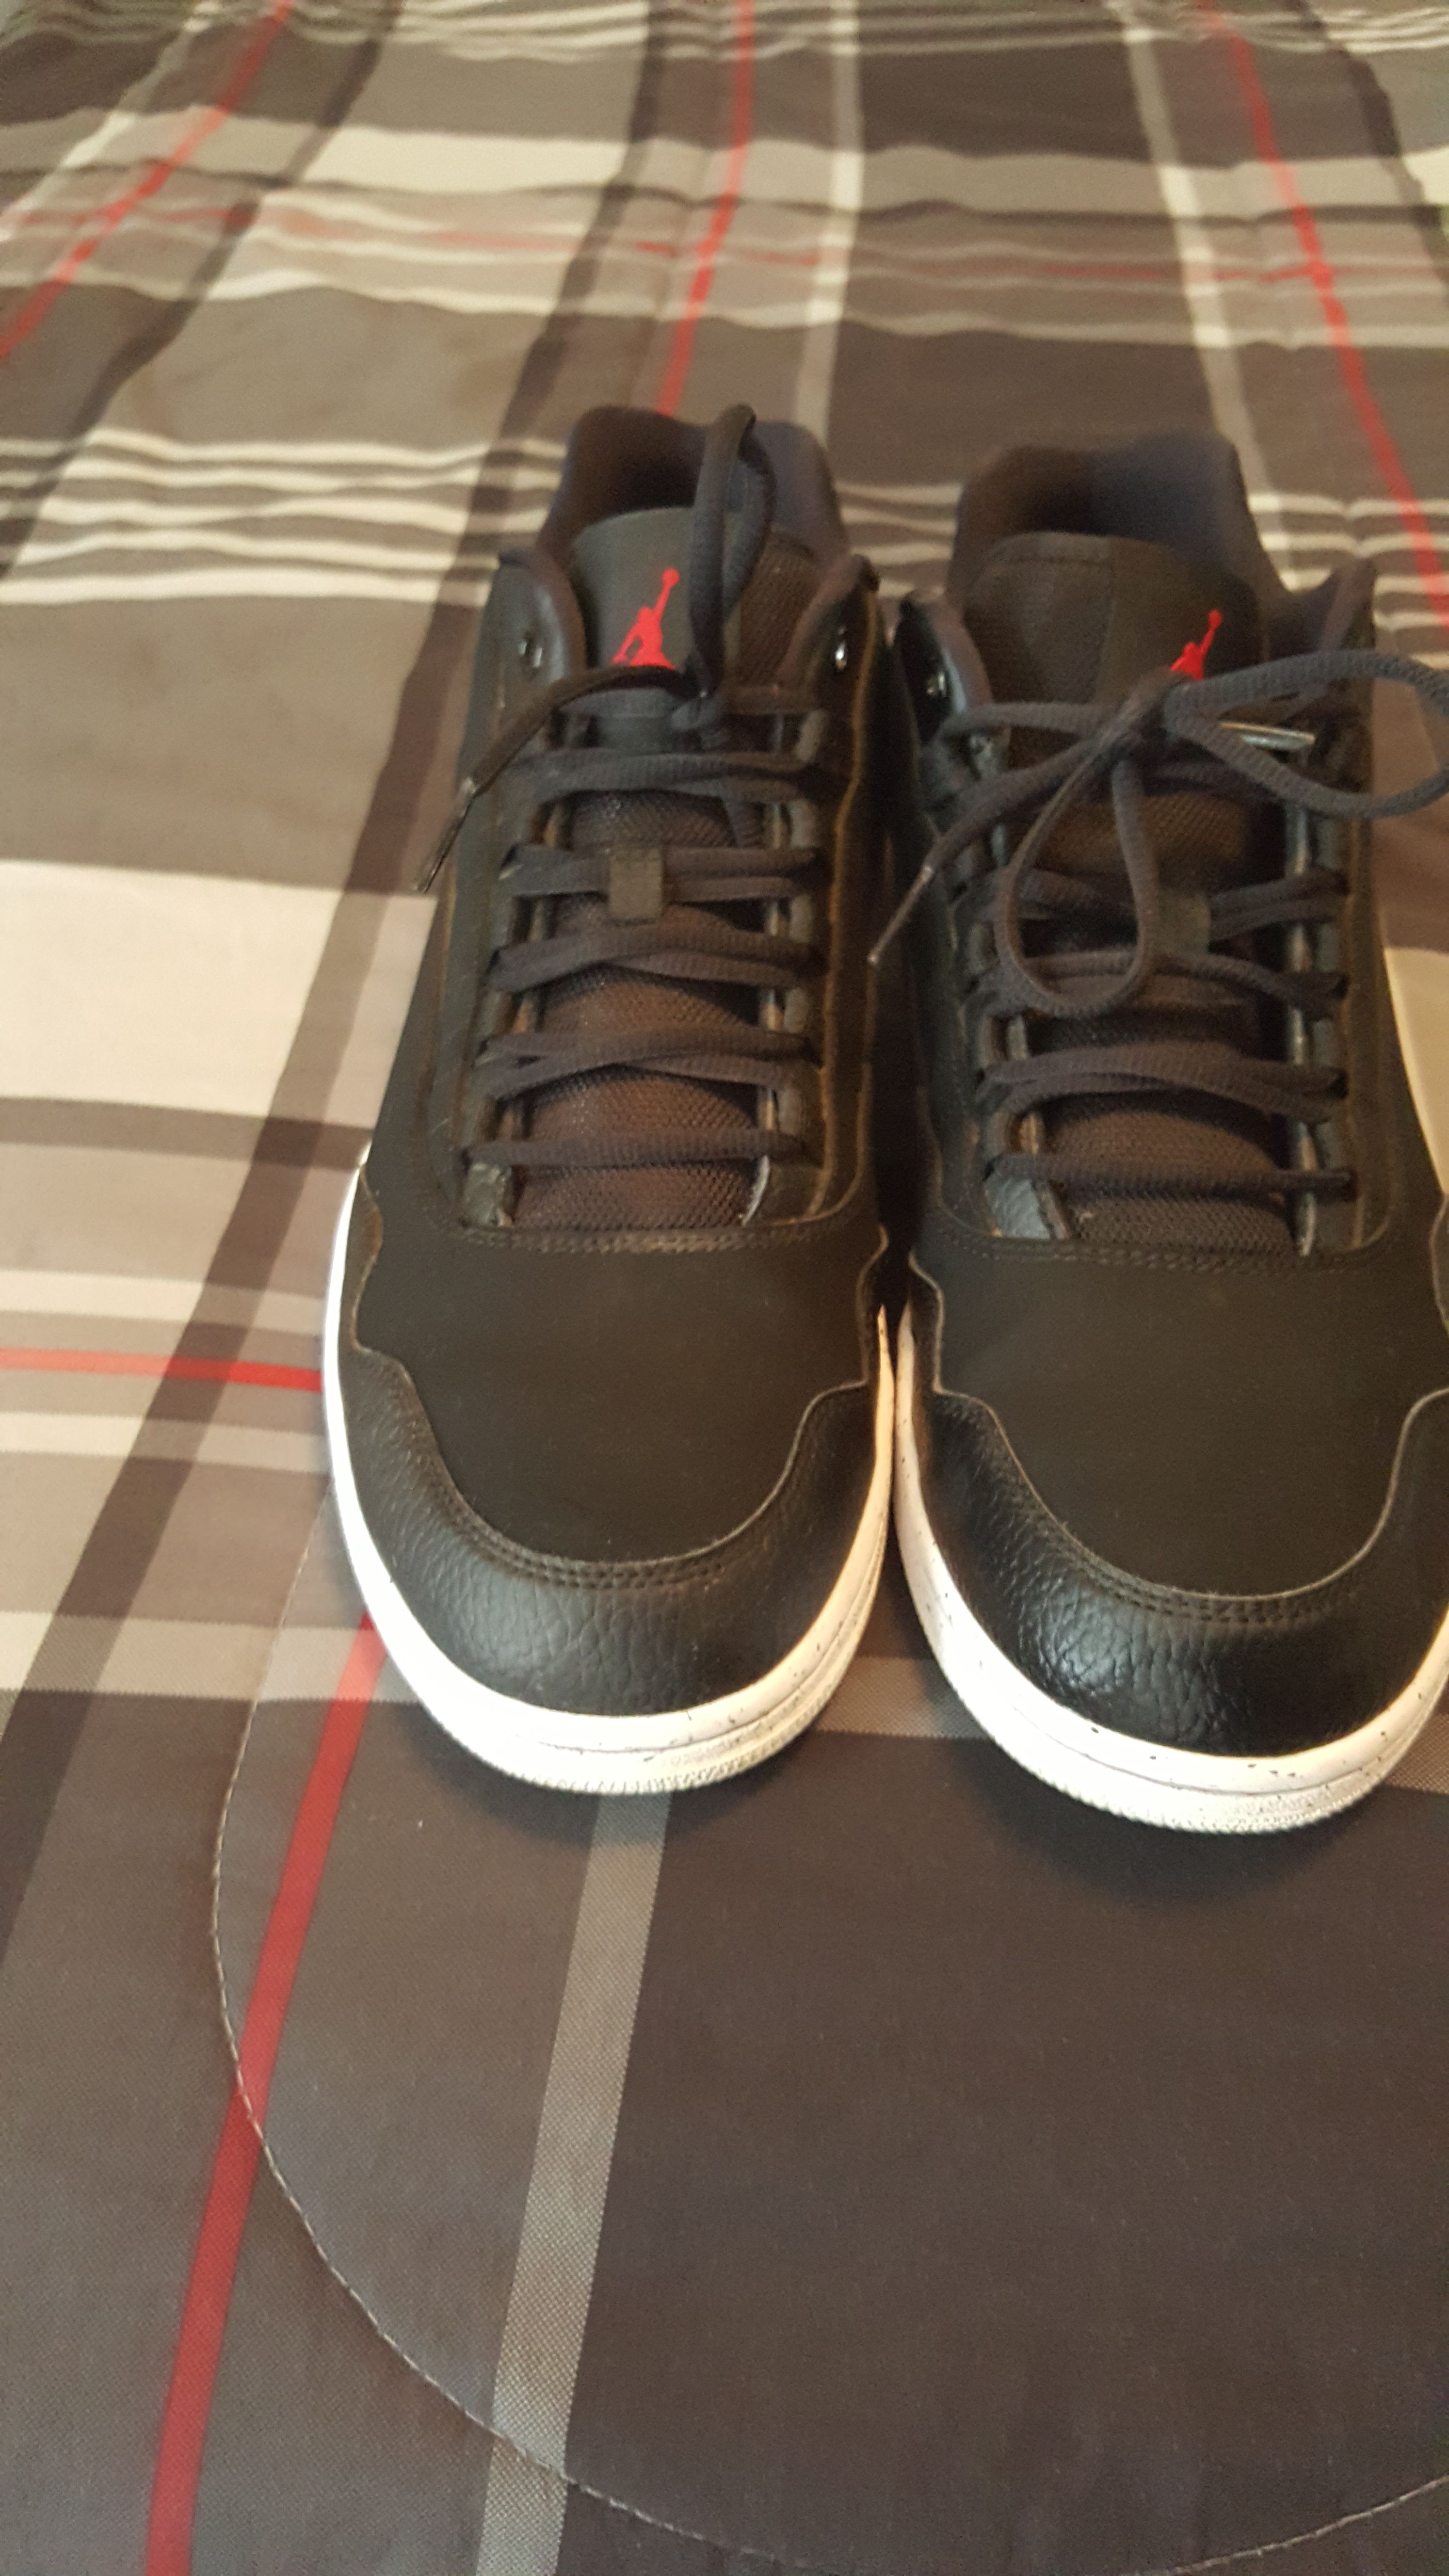 Geometrie Levendig kaas AIR JORDAN EXECUTIVE LOW MENS LIFESTYLE SHOE (BLACK/RED/WHITE) for Sale in  Spring, TX - OfferUp